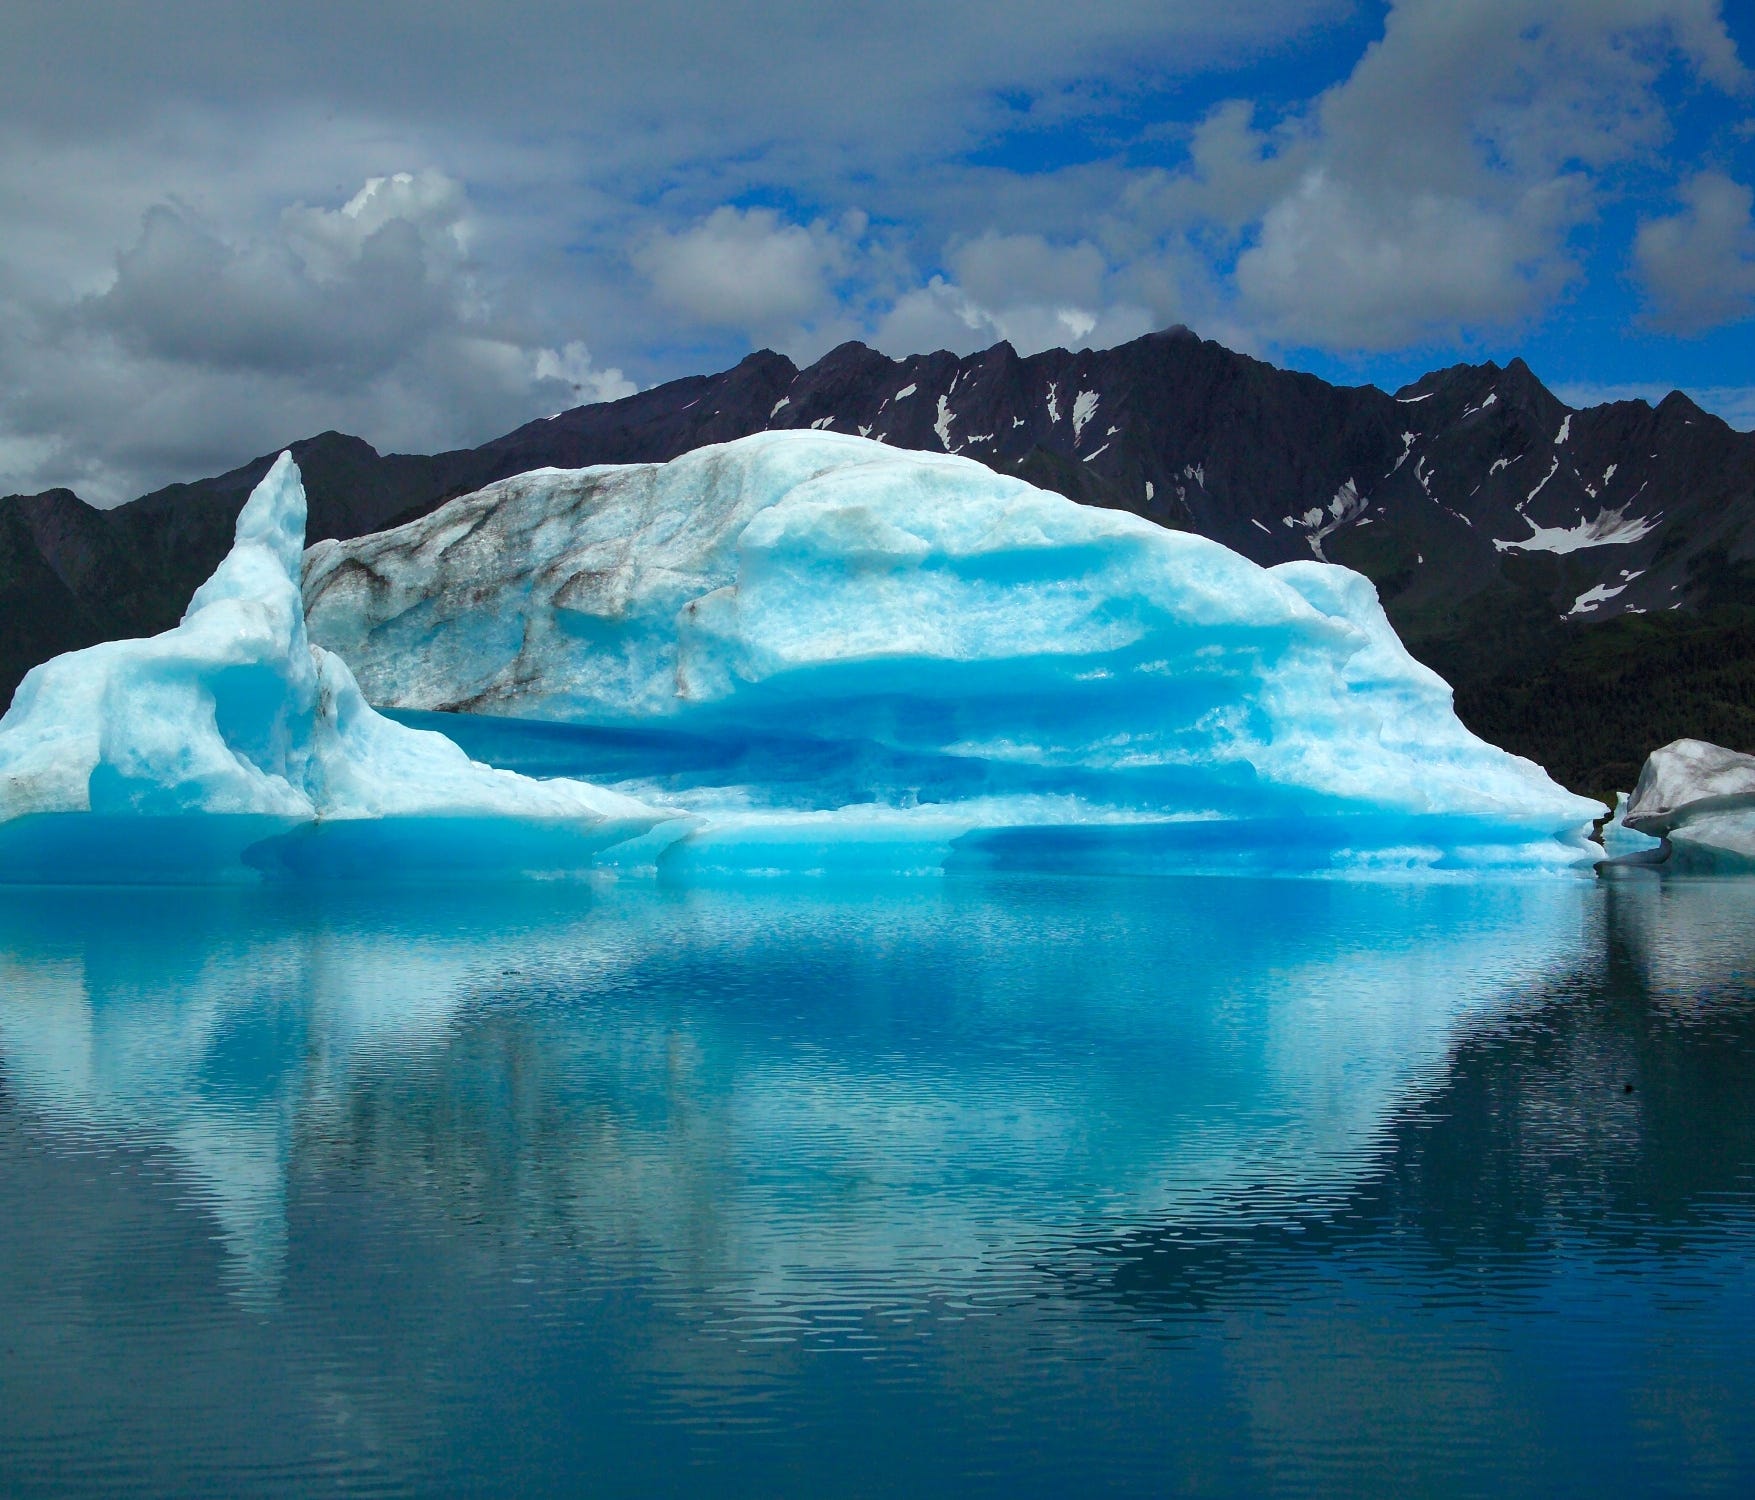 You'll find plenty of ice at Kenai Fjords National Park on the edge of the Kenai Peninsula in south-central Alaska, near Seward, where 40 glaciers are the main attraction.